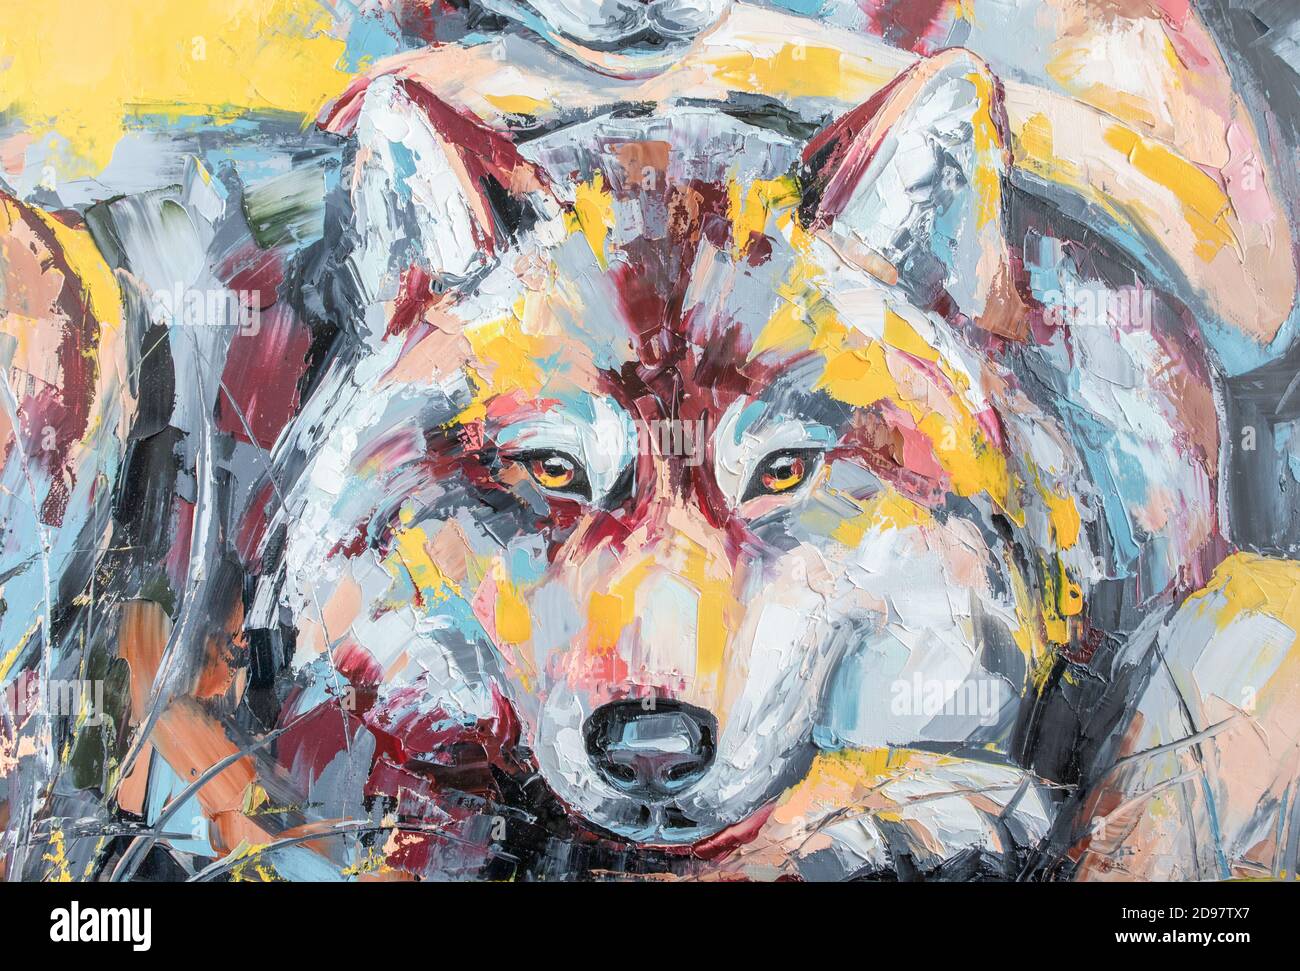 Watercolor howling wolf outdoor t-shirt design for sublimation